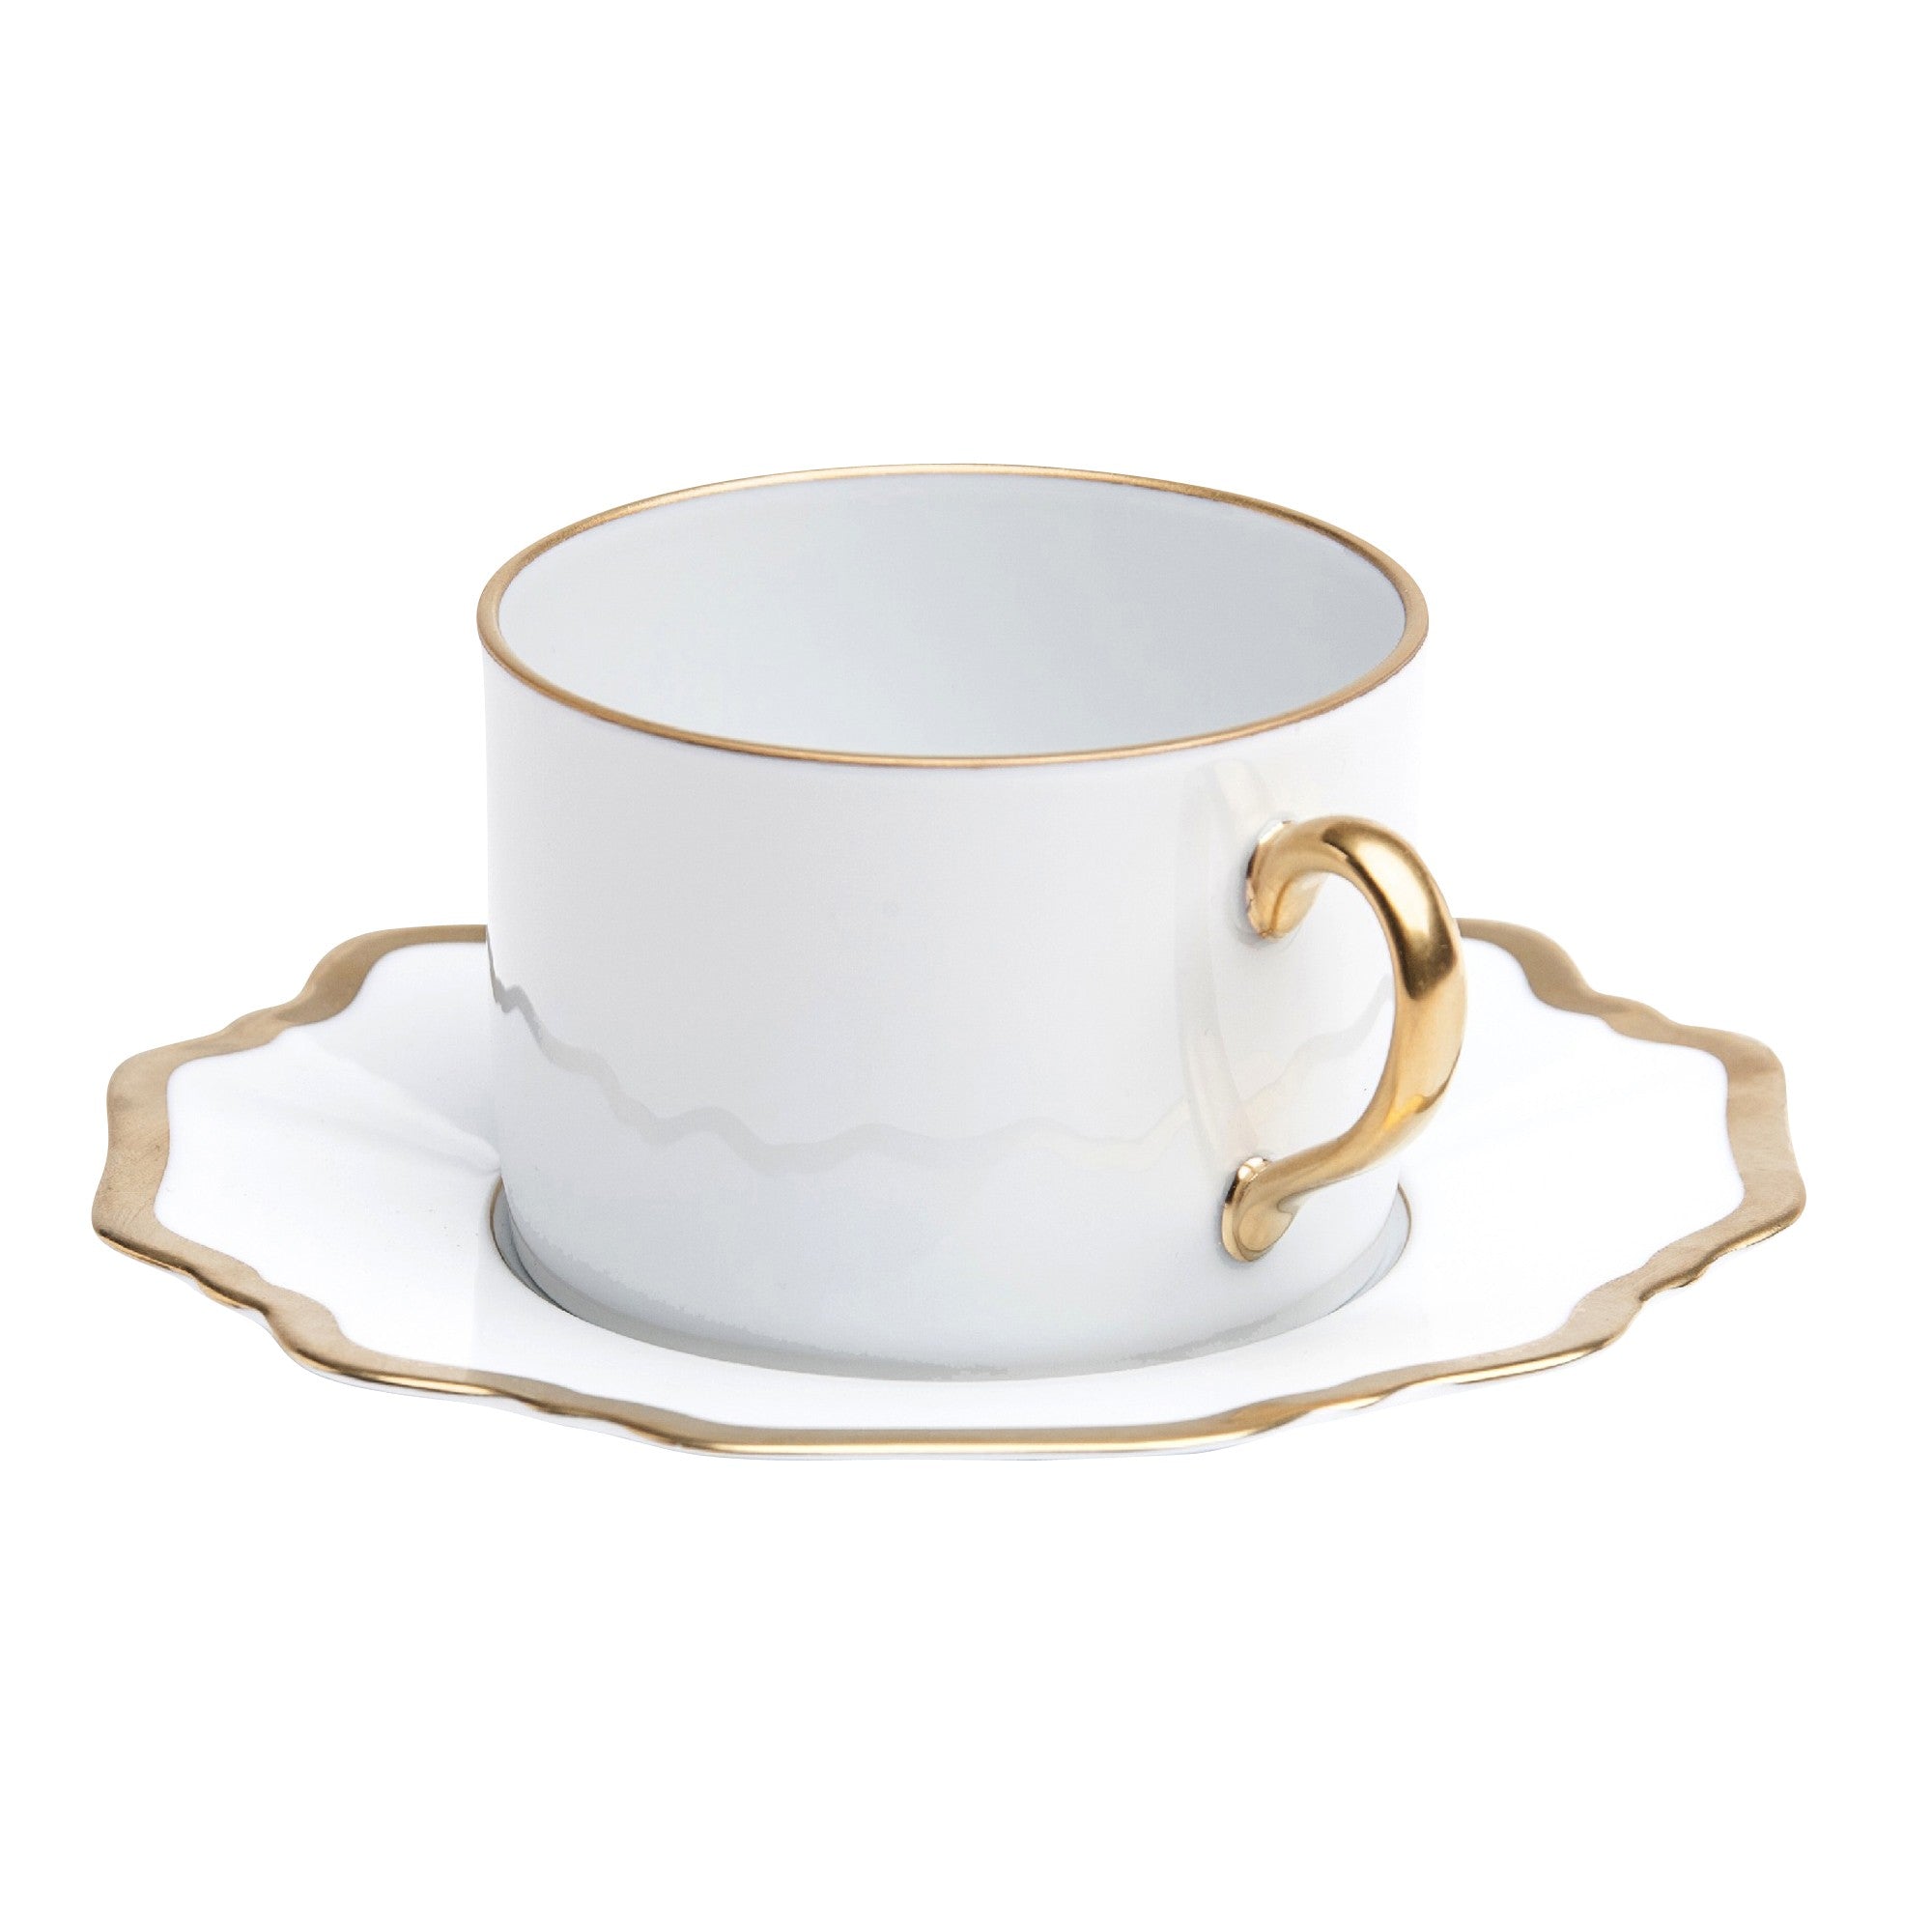 Antique White with Gold Rim Tea Cup